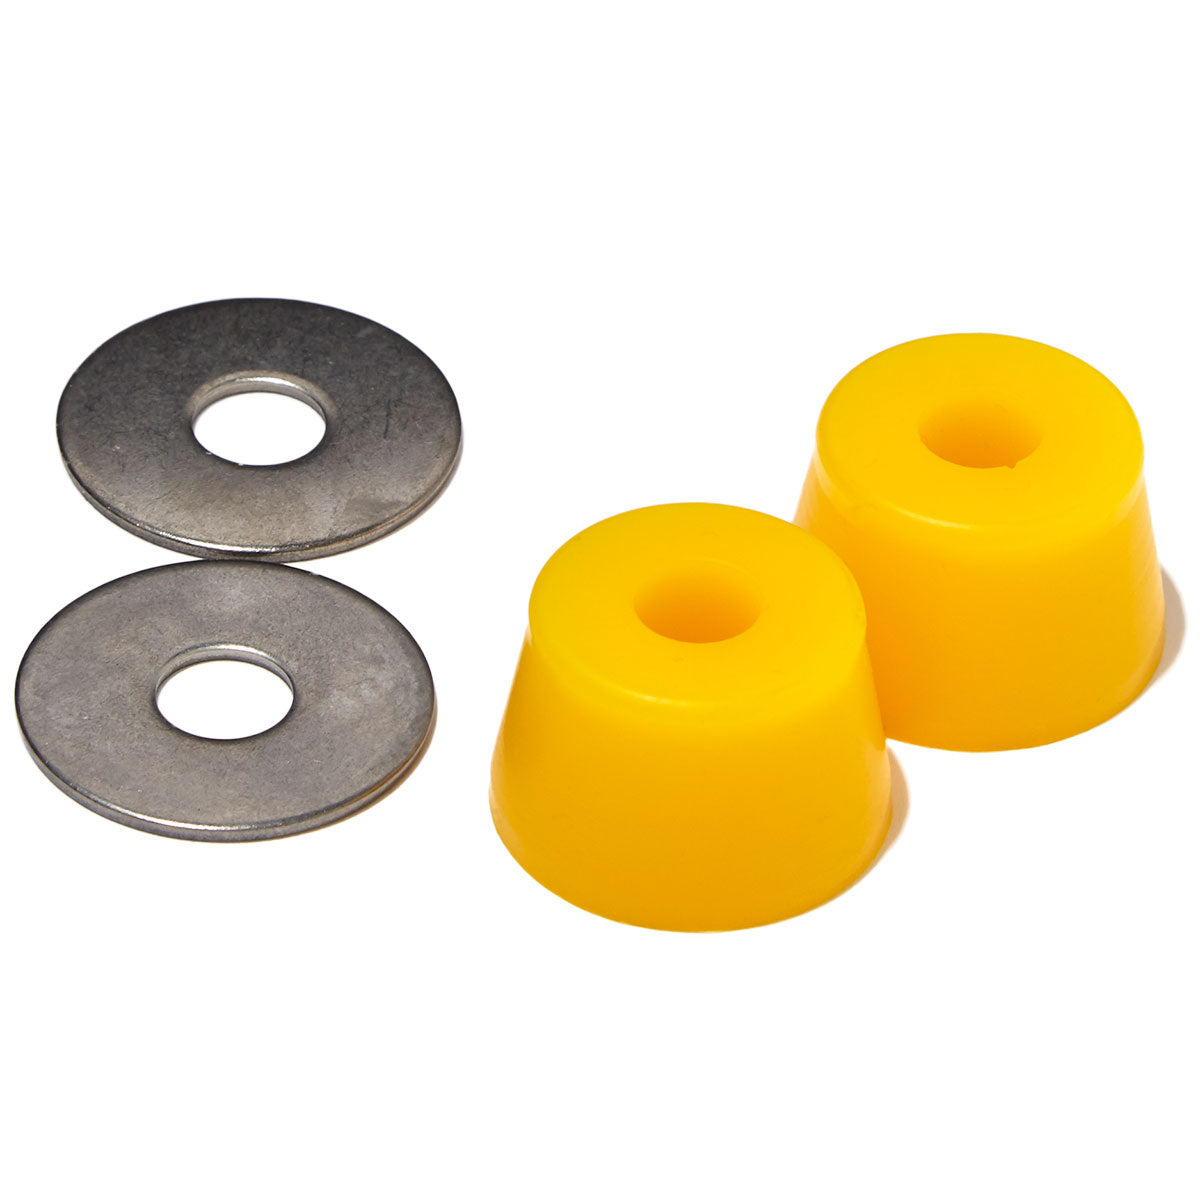 RipTide Tall Fat Cone Bushings - APS 90a image 1